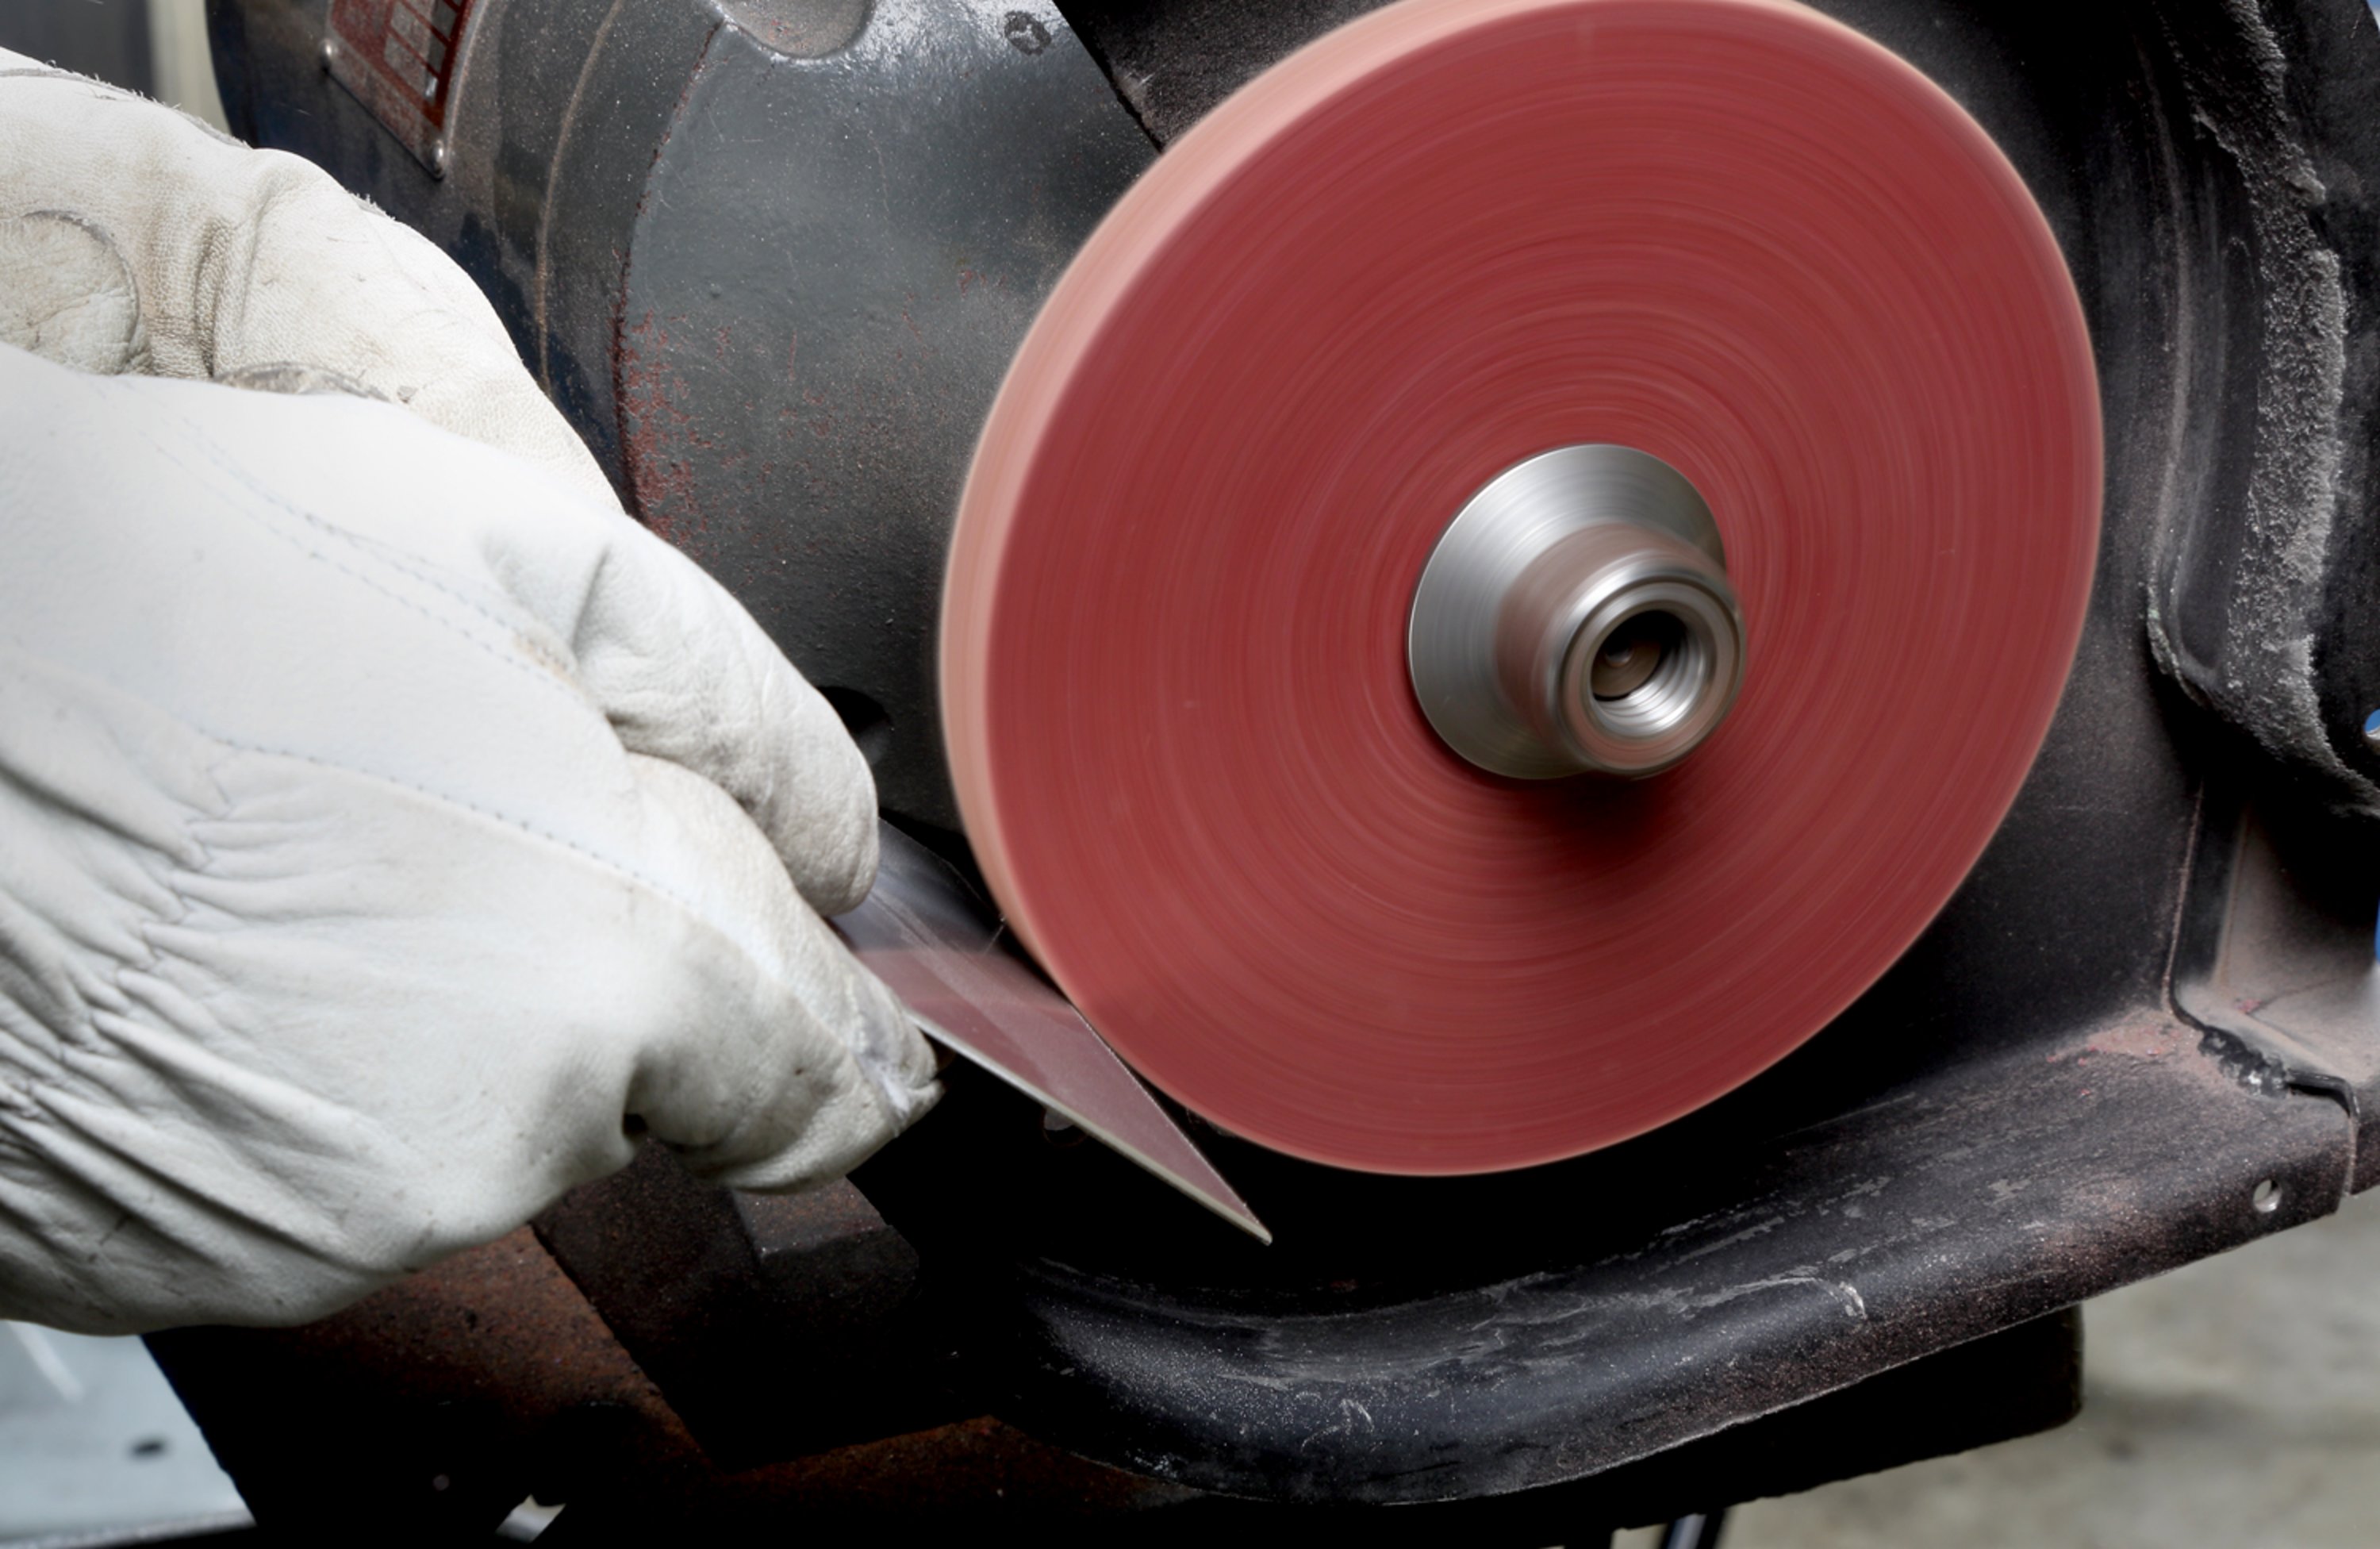 Standard Abrasives™ Unitized Wheels are a great match for tough deburring, cleaning, blending and finishing applications.